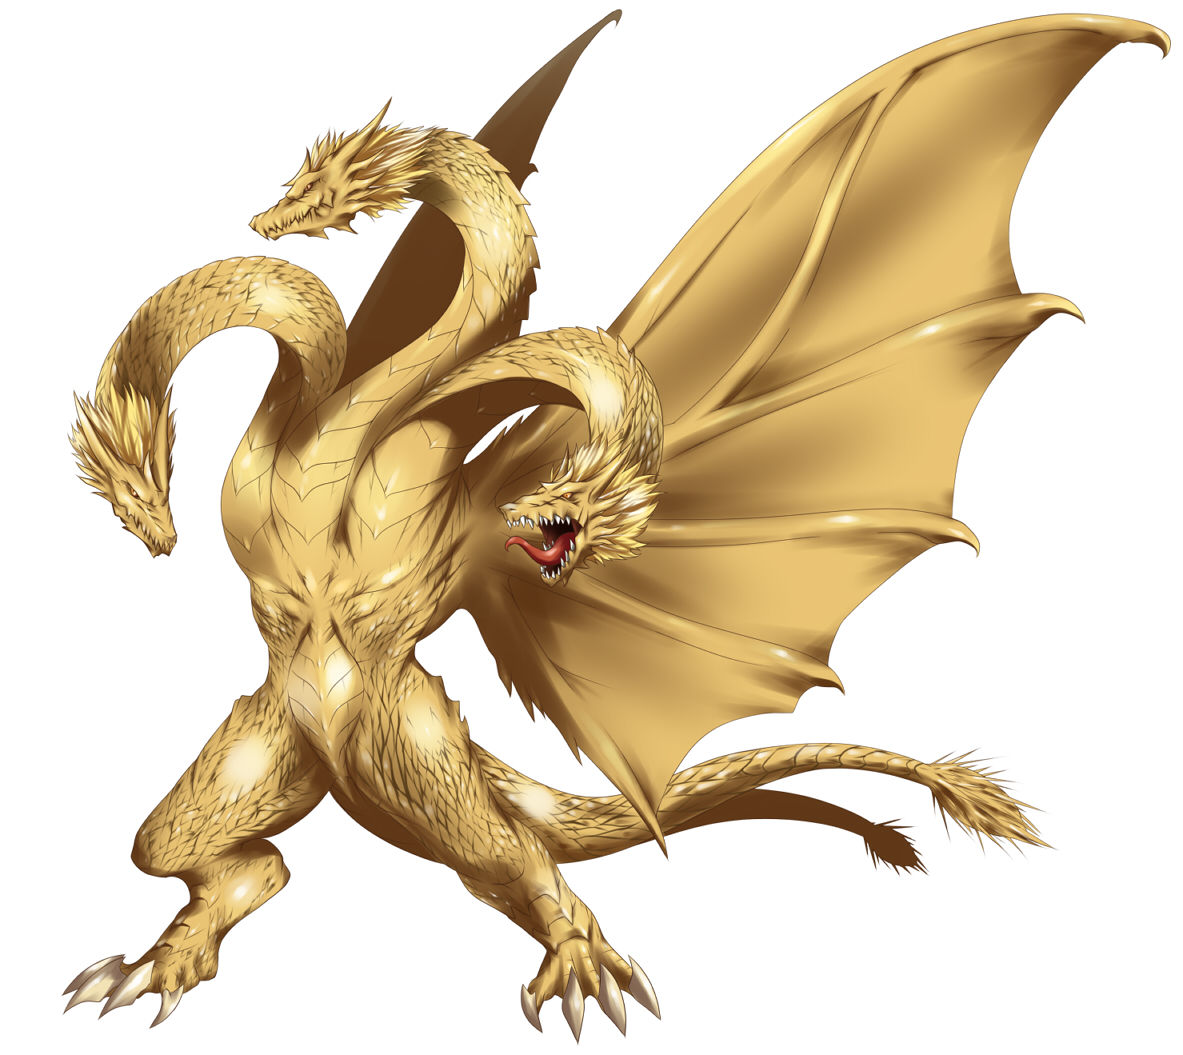 King Ghidorah appears to be a three-headed golden dragon with two legs, no ...